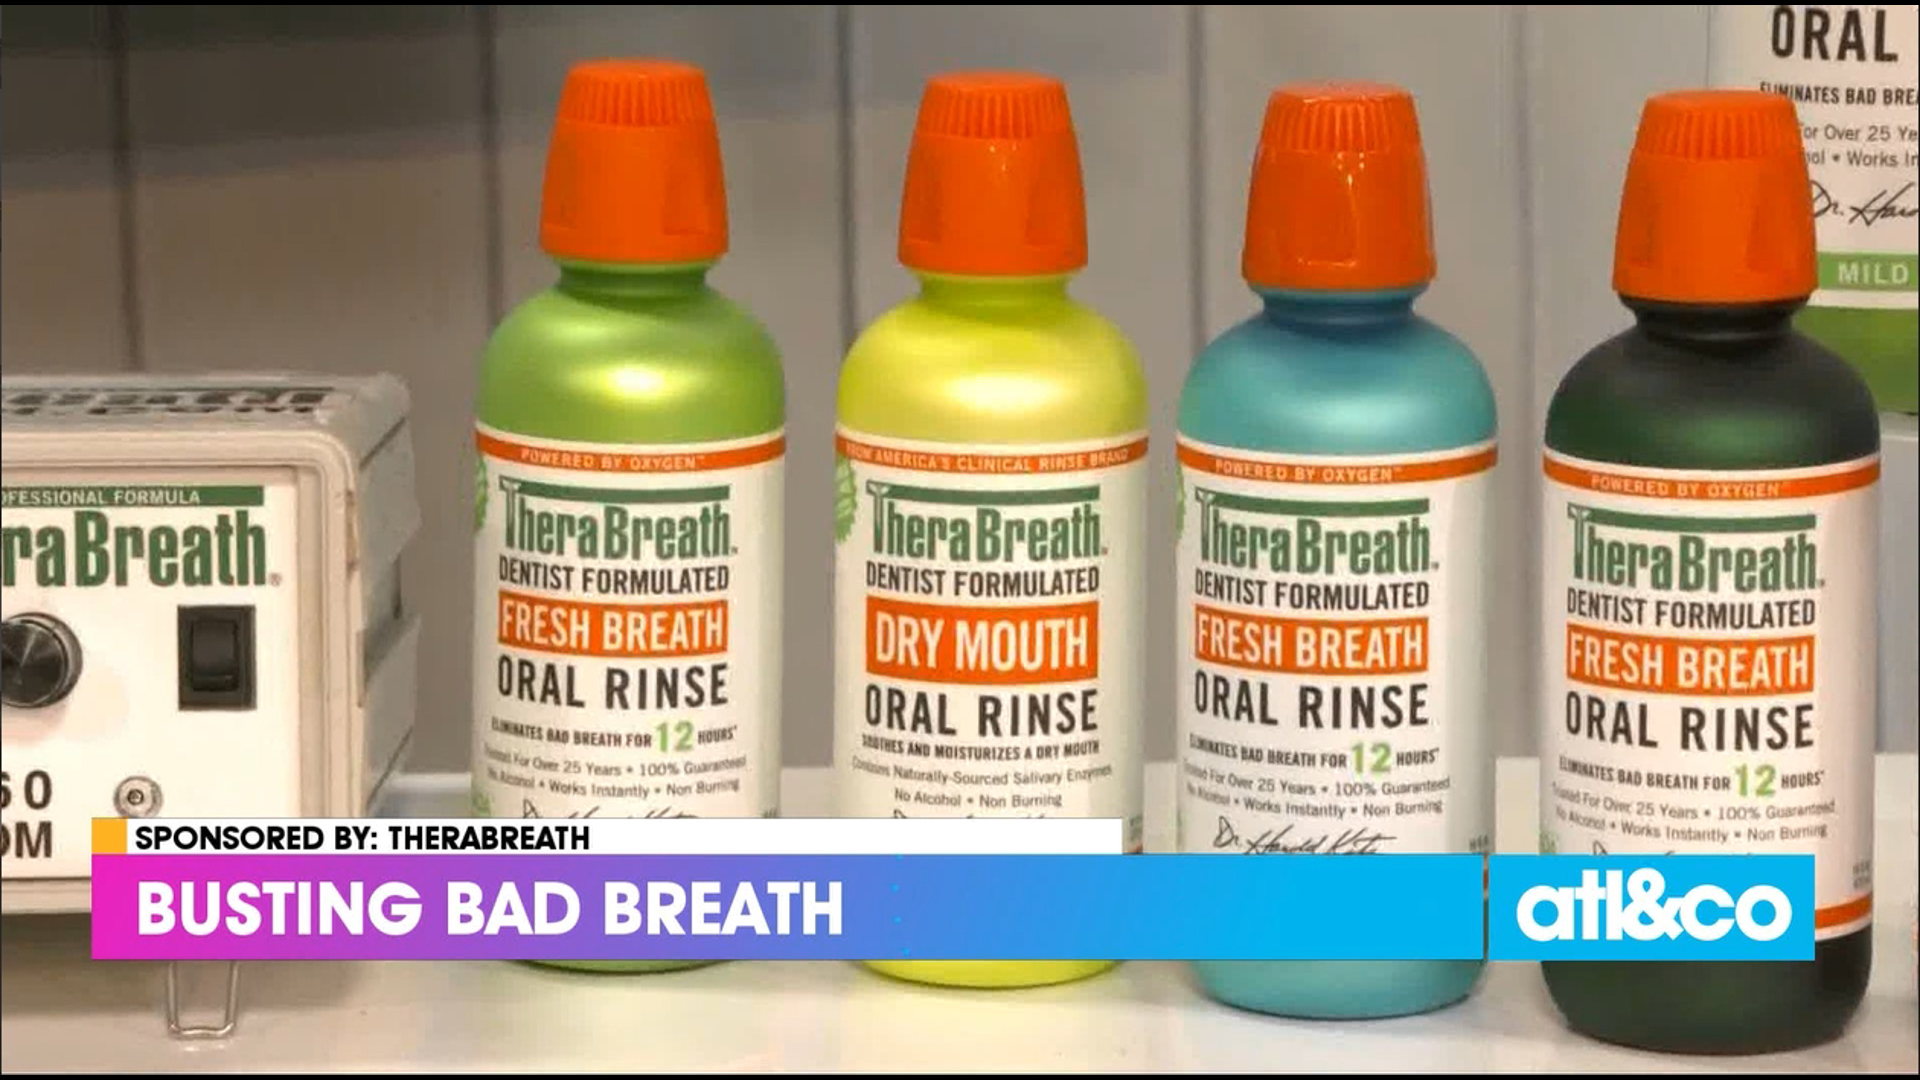 Learn what causes bad breath and fix it with TheraBreath's oral rinse.